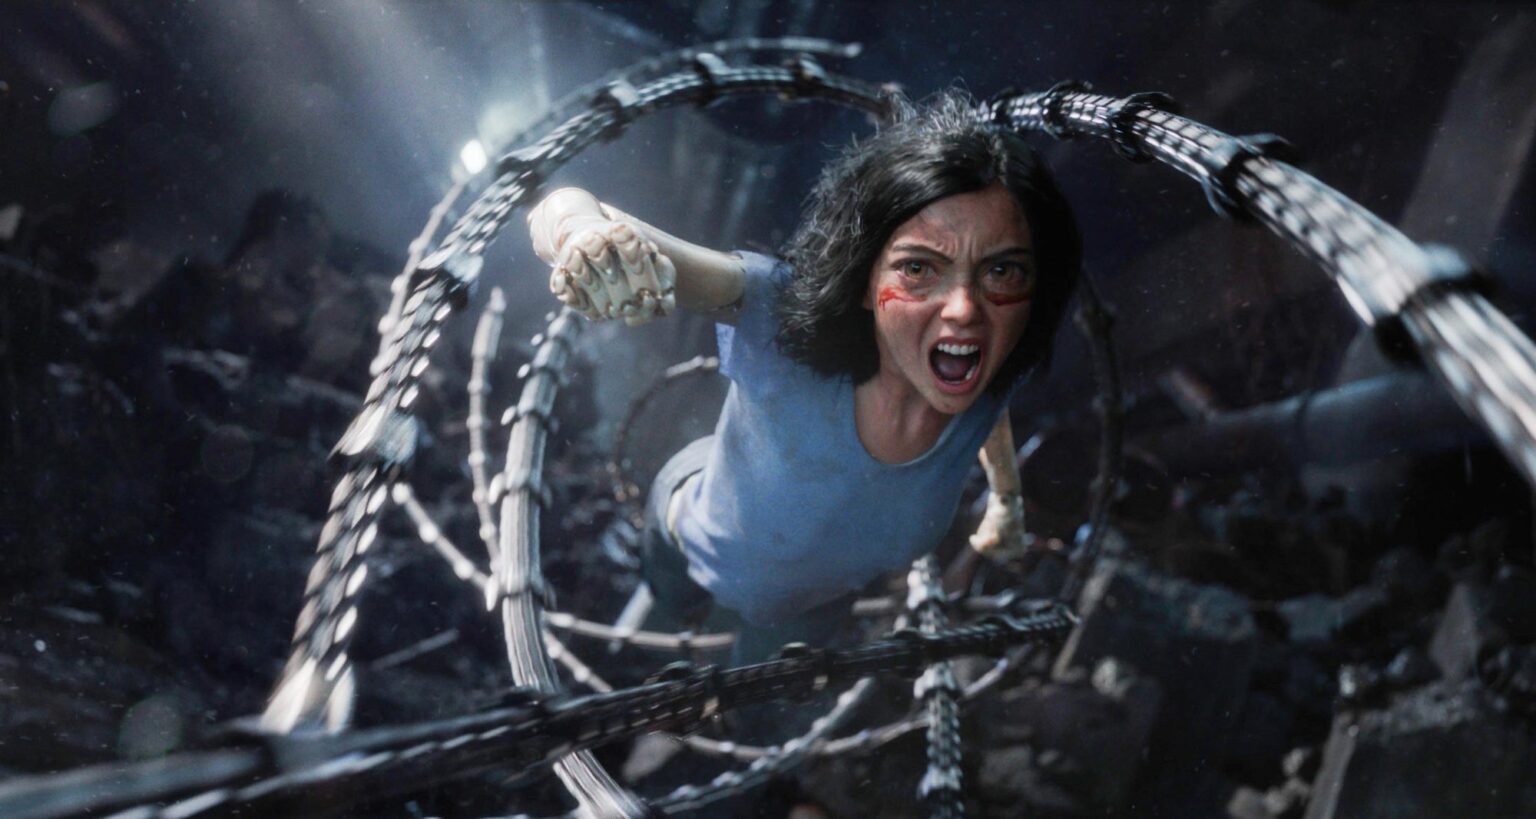 Attention Alita Army: Alita: Battle Angel 2 could be coming to a screen near you. Will Robert Rodriguez get it on Disney+?